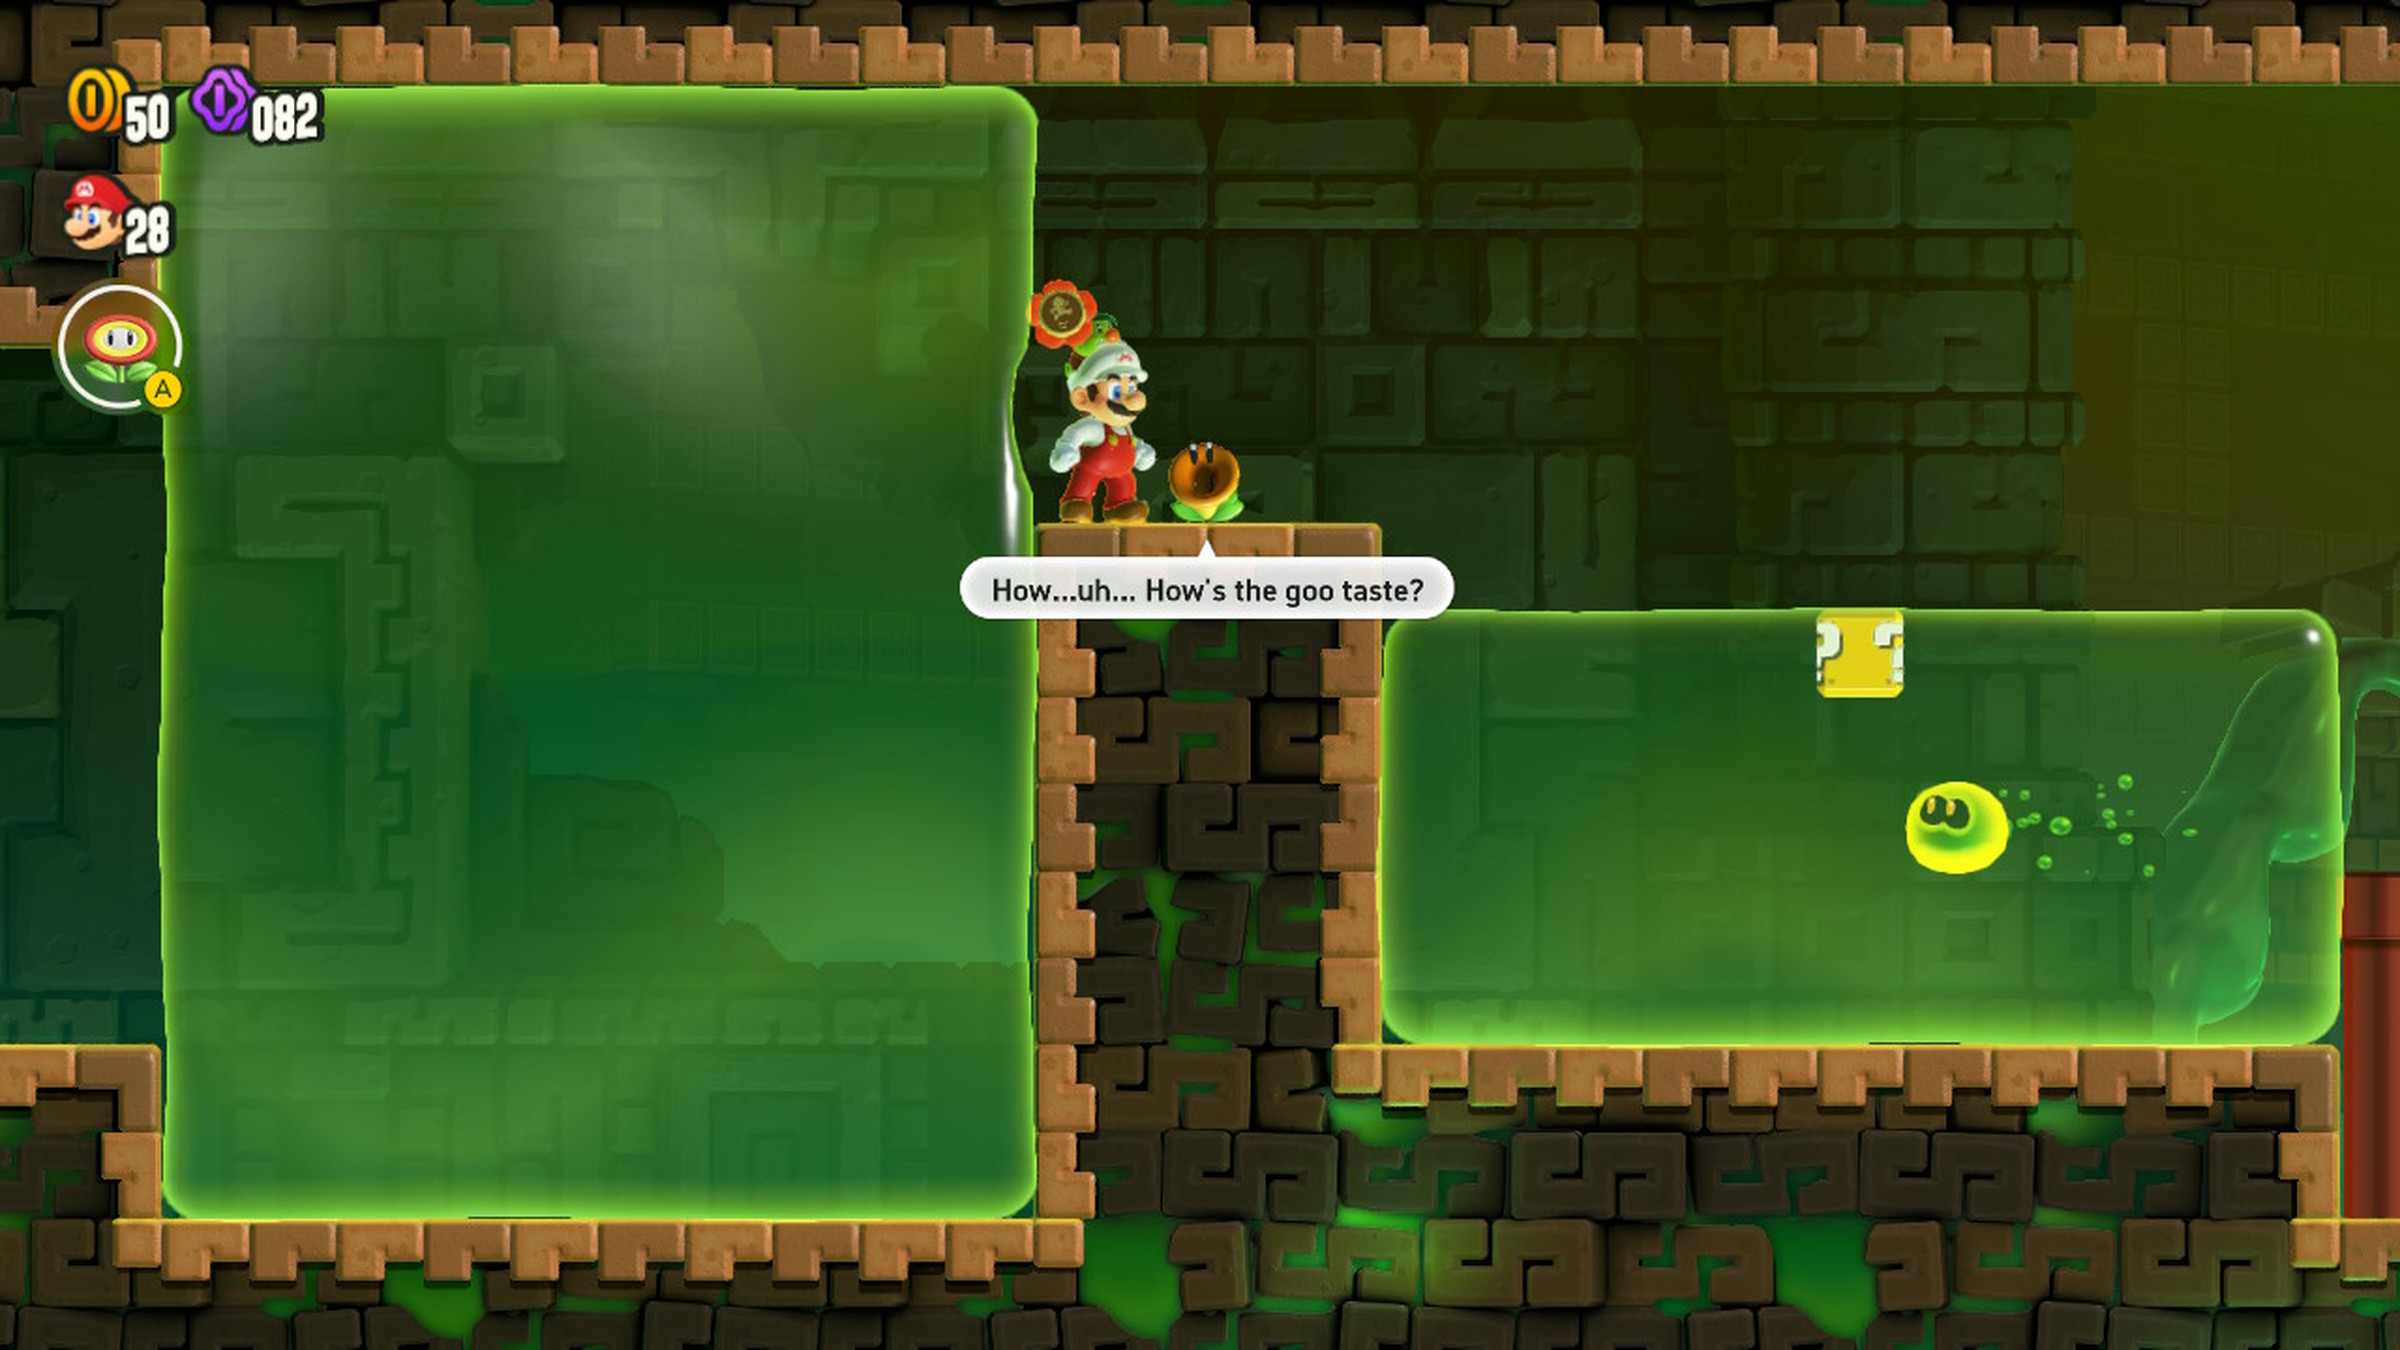 A screenshot from the video game Super Mario Bros. Wonder, in which Mario is talking to a flower while surrounded by green goo.